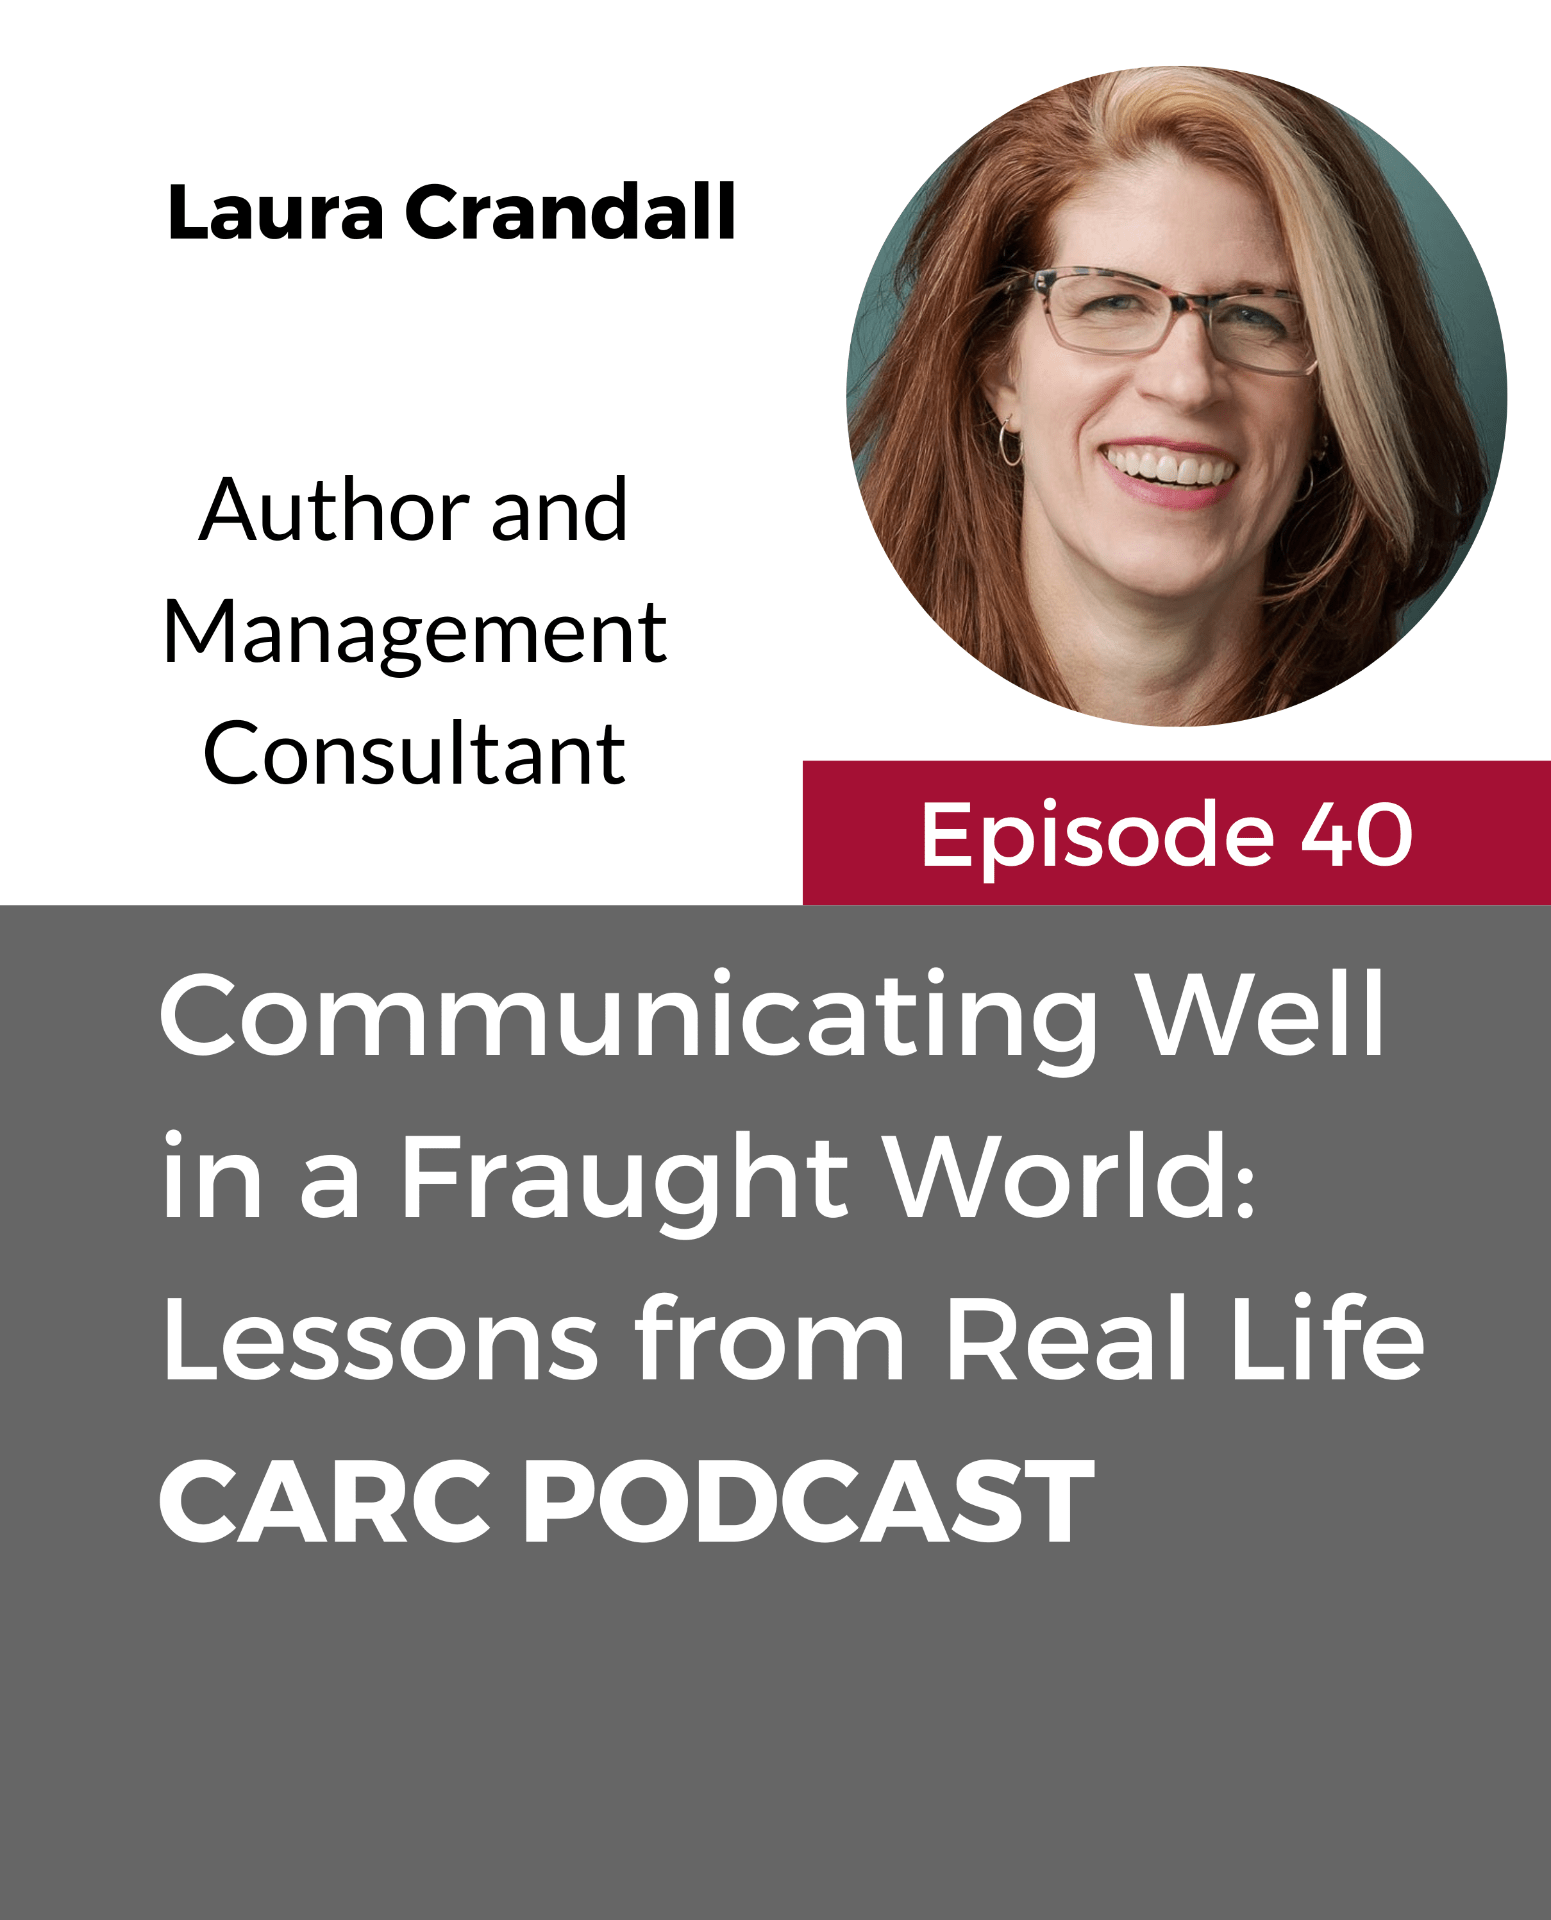 CARC Podcast, Episode 40, Communicating Well in a Fraught World with Laura Crandall